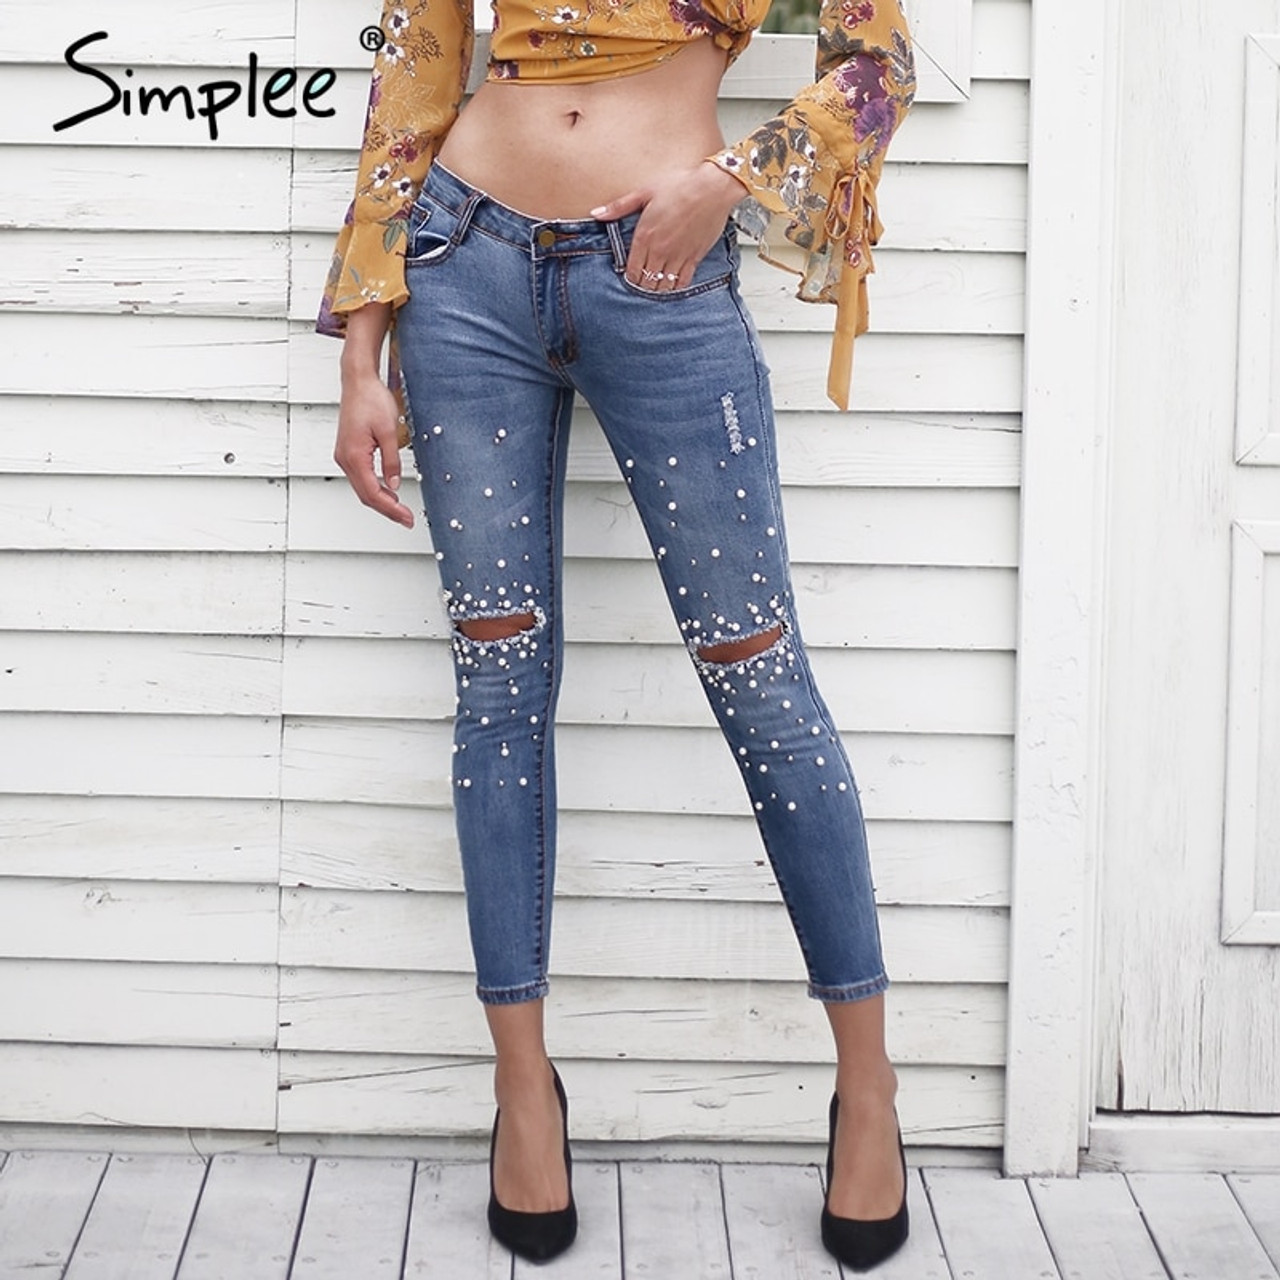 Ripped & Scratch Jeans in the size 32 for Women on sale | FASHIOLA INDIA